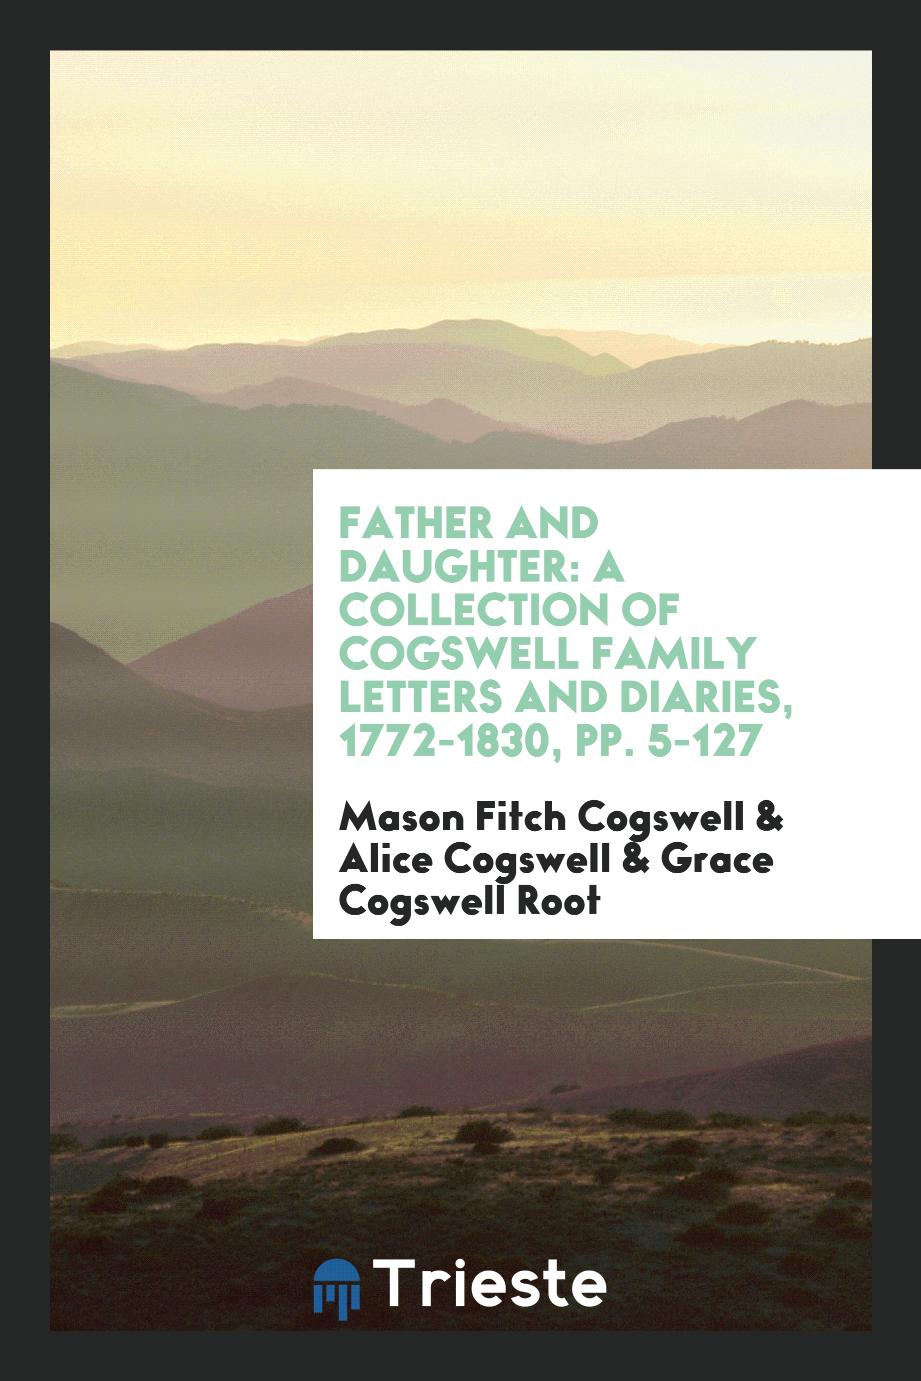 Father and Daughter: A Collection of Cogswell Family Letters and Diaries, 1772-1830, pp. 5-127